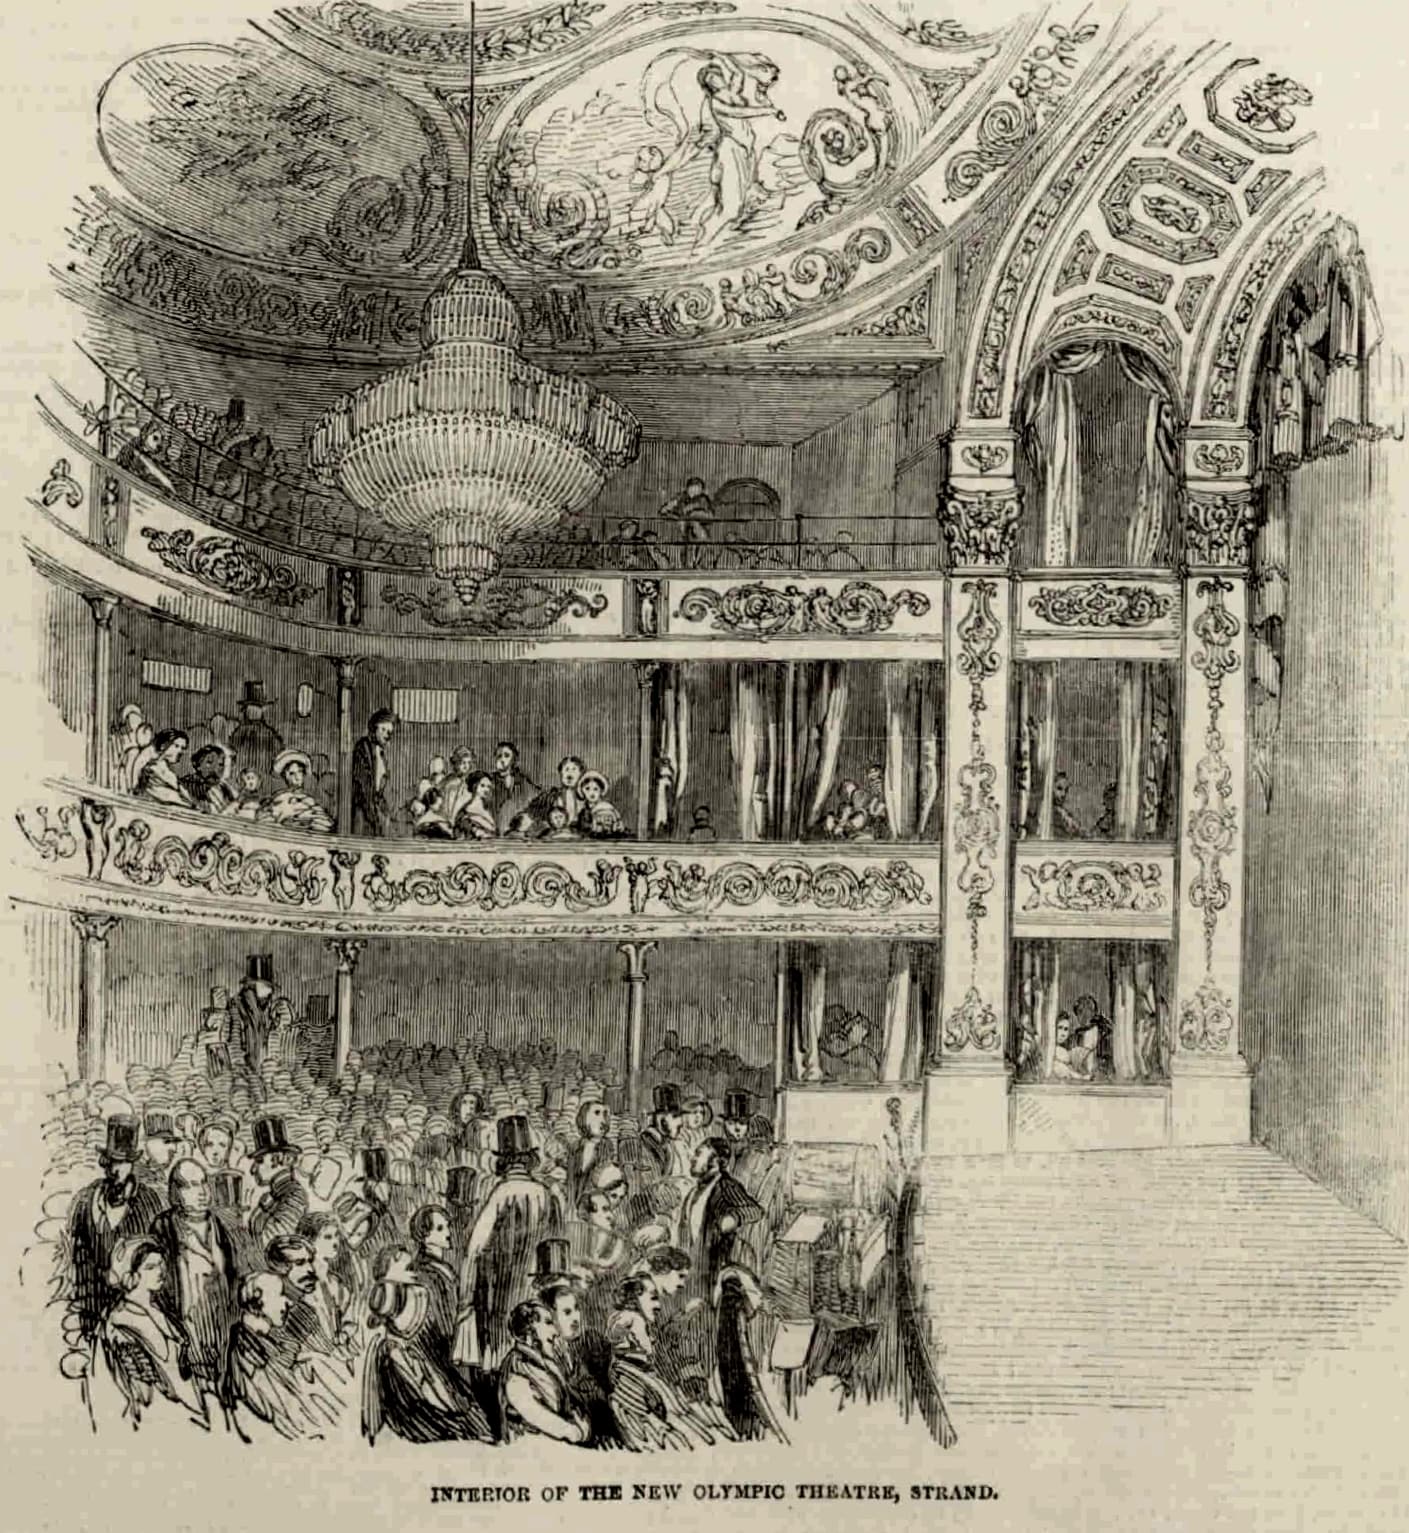 INTERIOR OF THE NEW OLYMPIC THEATRE, STRAND, Illustrated London News (12 January 1850), 13